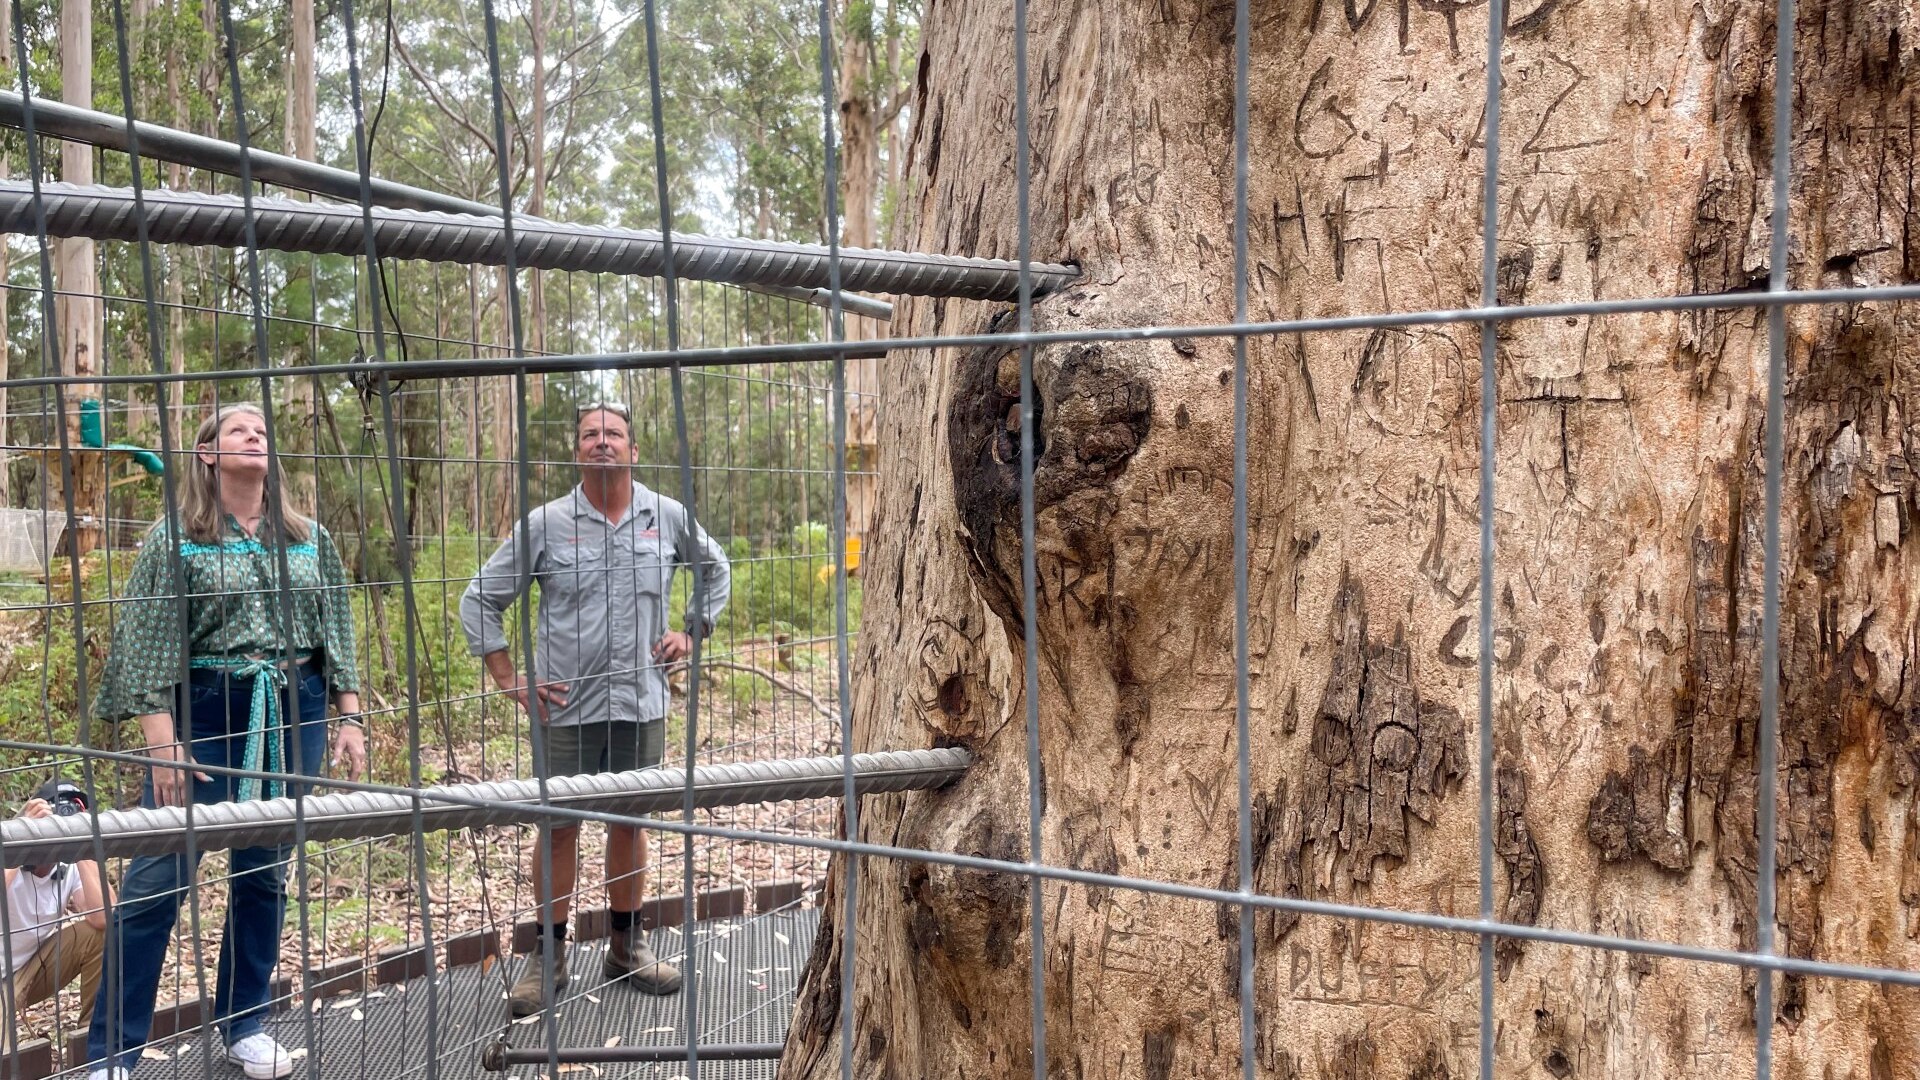 twelve month wait for western australia's giant climbing trees to reopen, despite funding injection